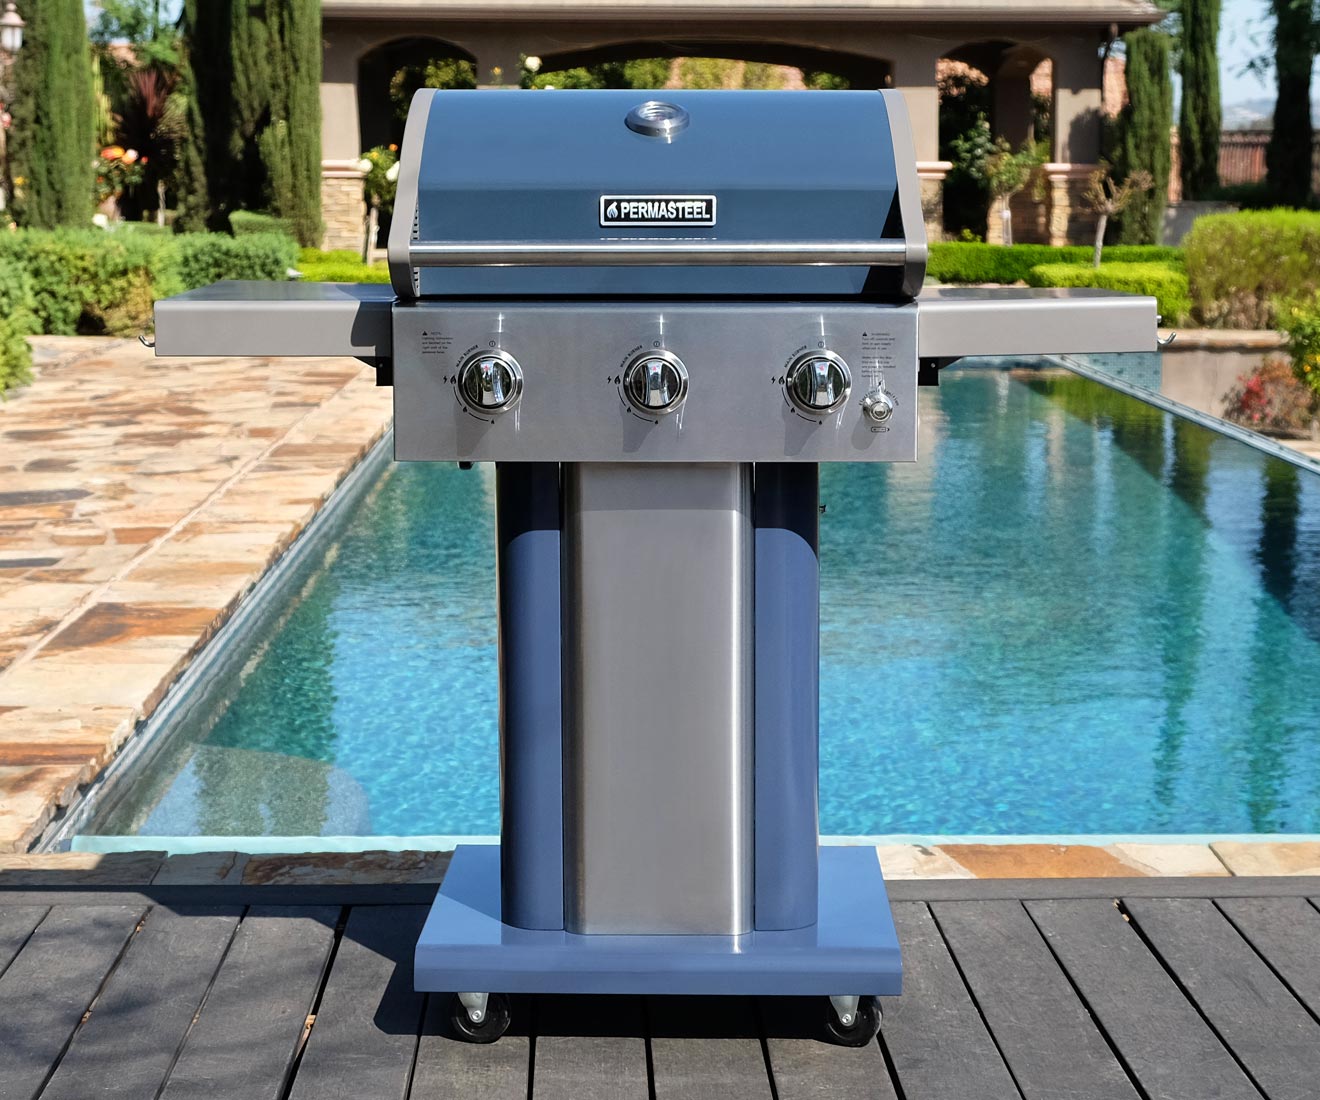 Permasteel 3-Burner Gas Grill PG-40301 in Azure for Outdoor Grilling BBQ Barbecue Barbeque in Lifestyle Photo Image Setting Environment Patio Backyard Deck Poolside Pool Swimming